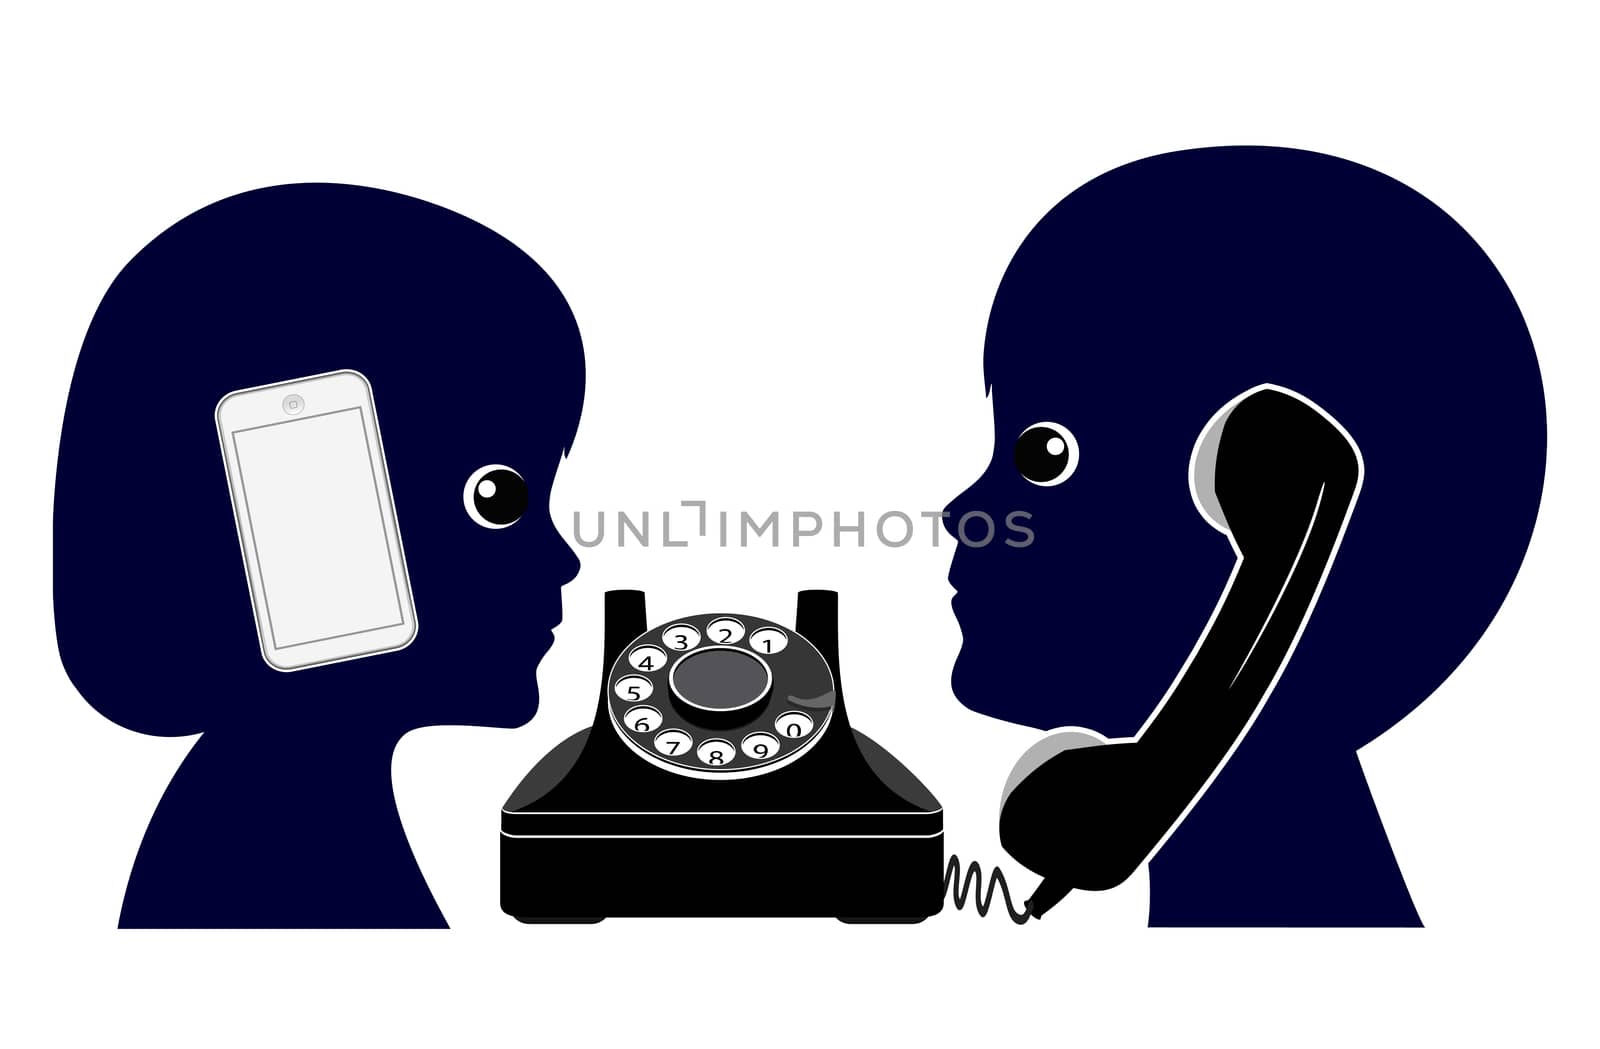 Old Telephone versus Mobile Phone by Bambara